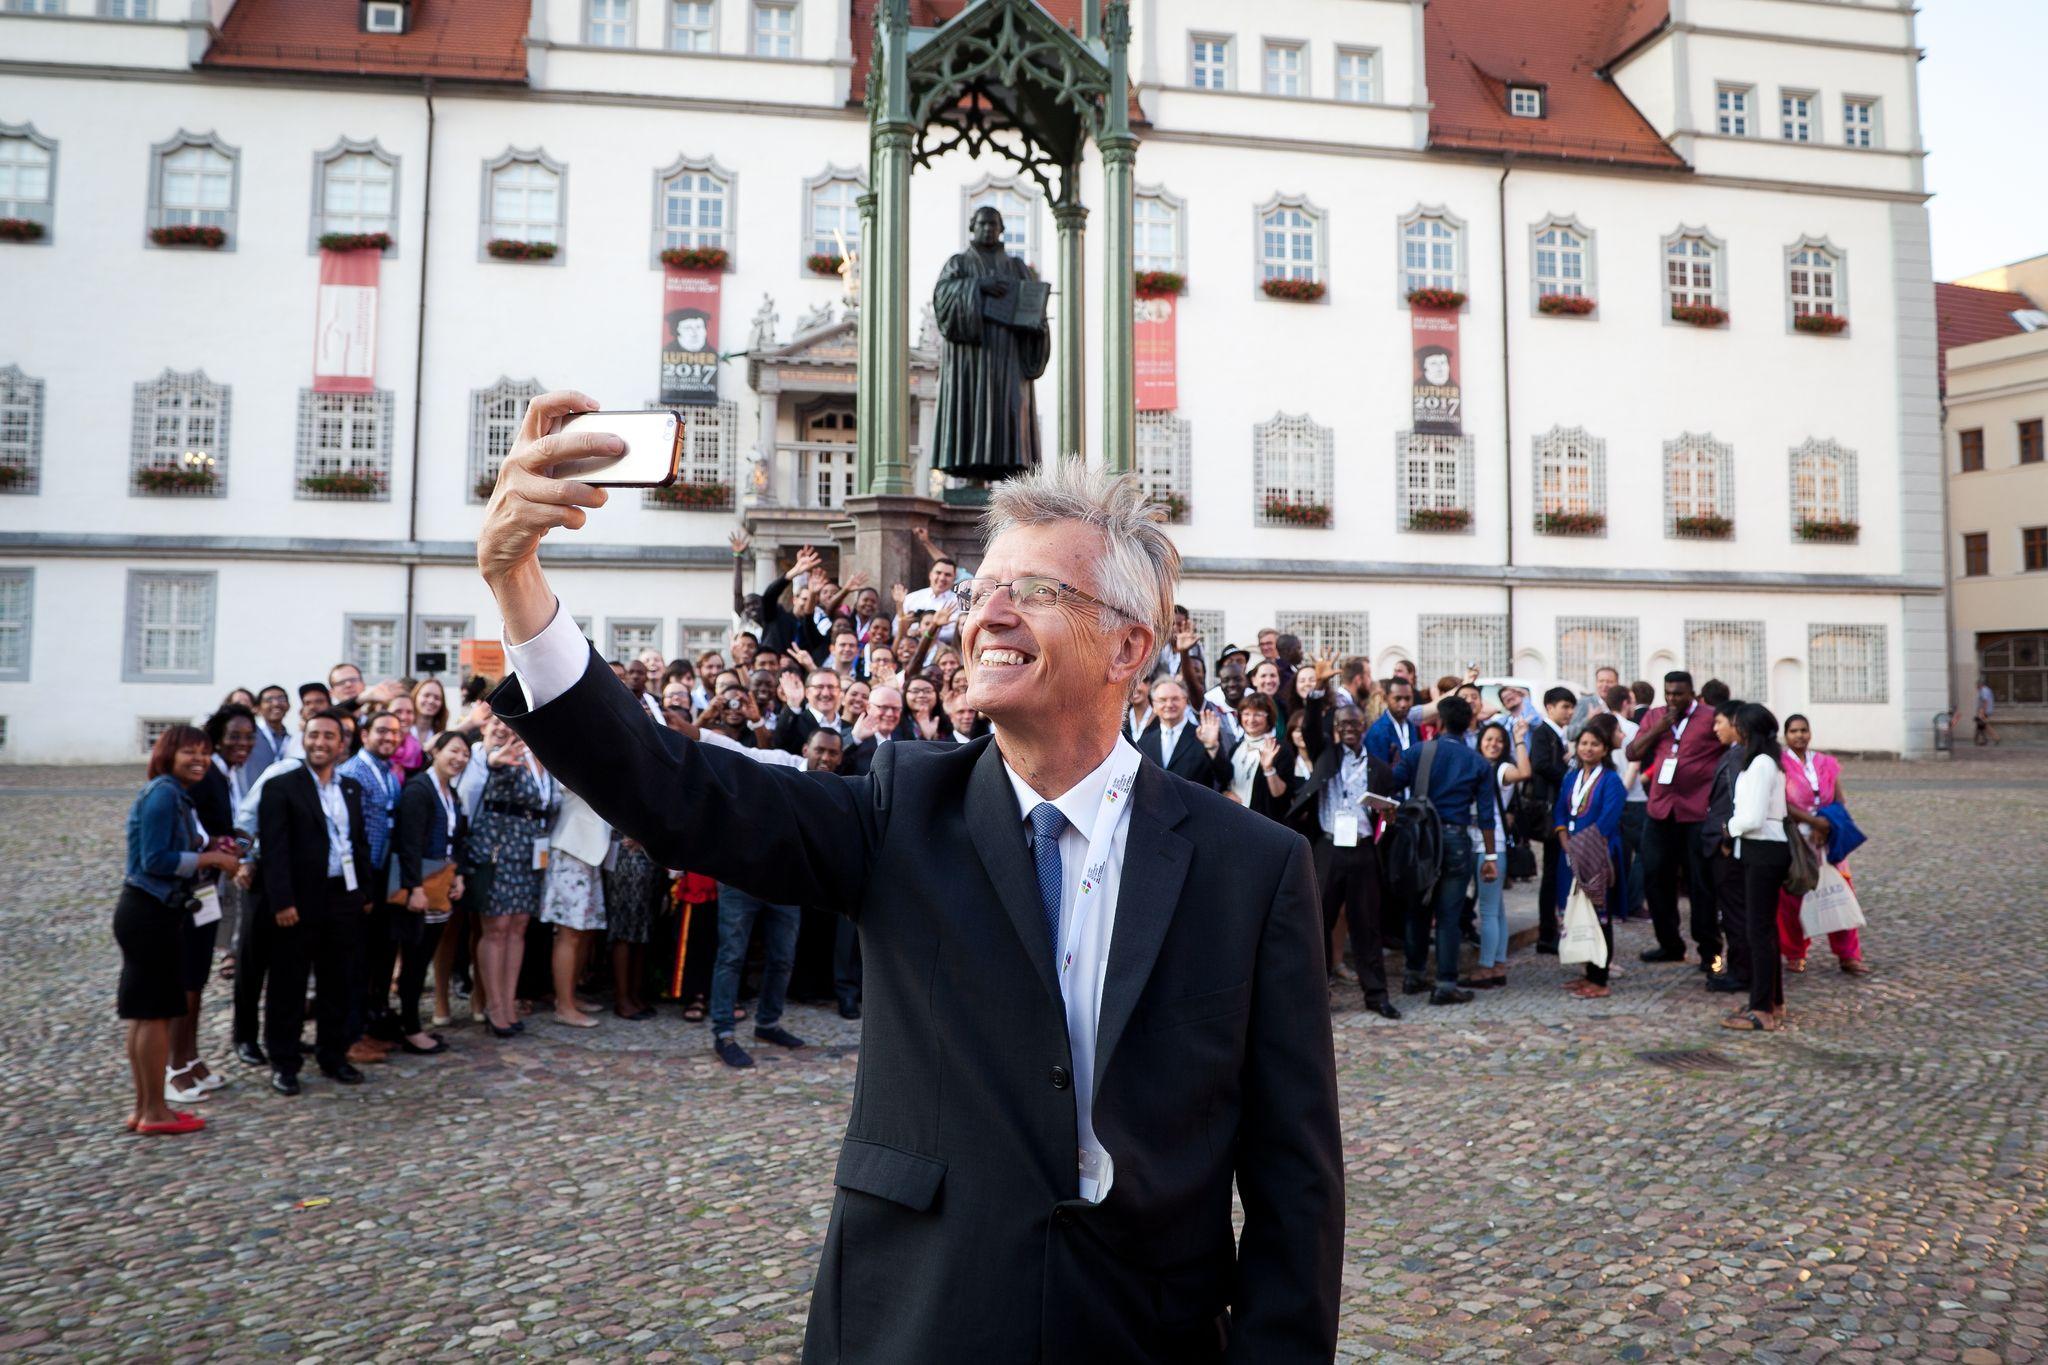 LWF General Secretary Martin Junge taking a selfie of himself, the old reformer Martin Luther and the young reformers on a square in Wittenberg. Photo: LWF/Marko Schoeneberg